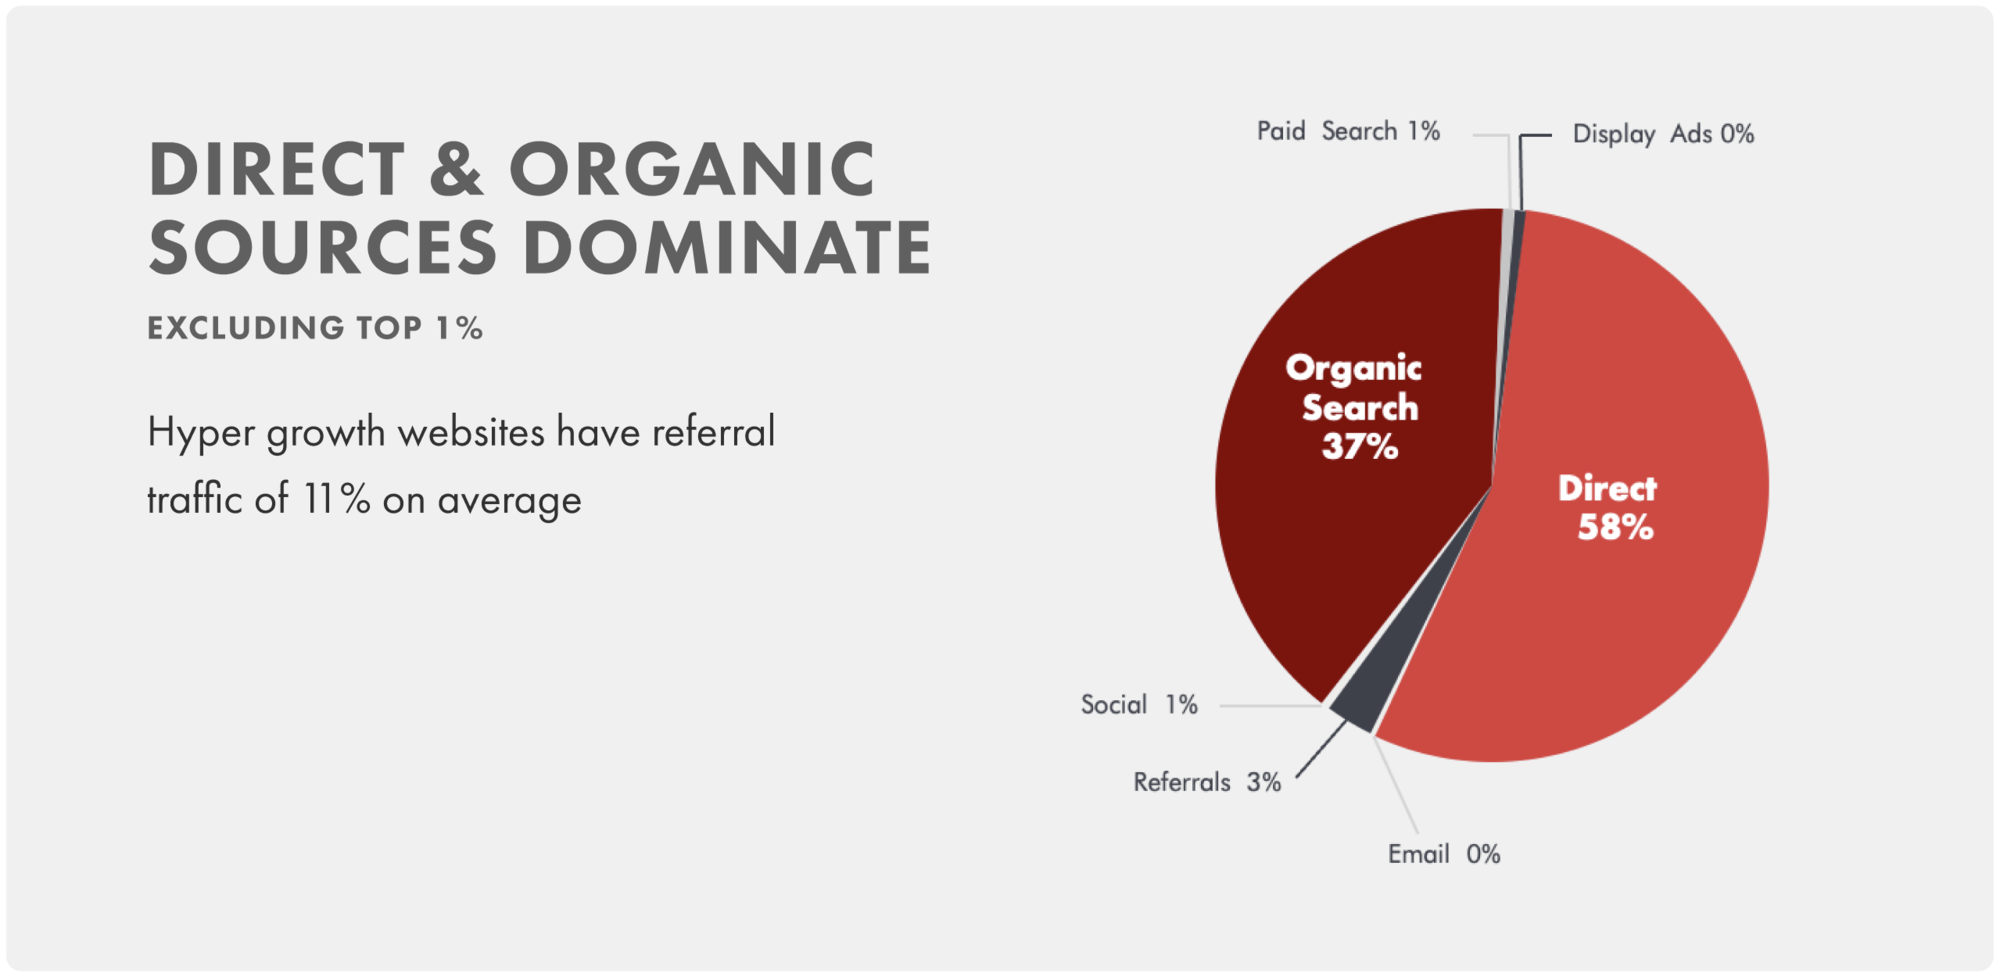 Direct & organic sources dominate